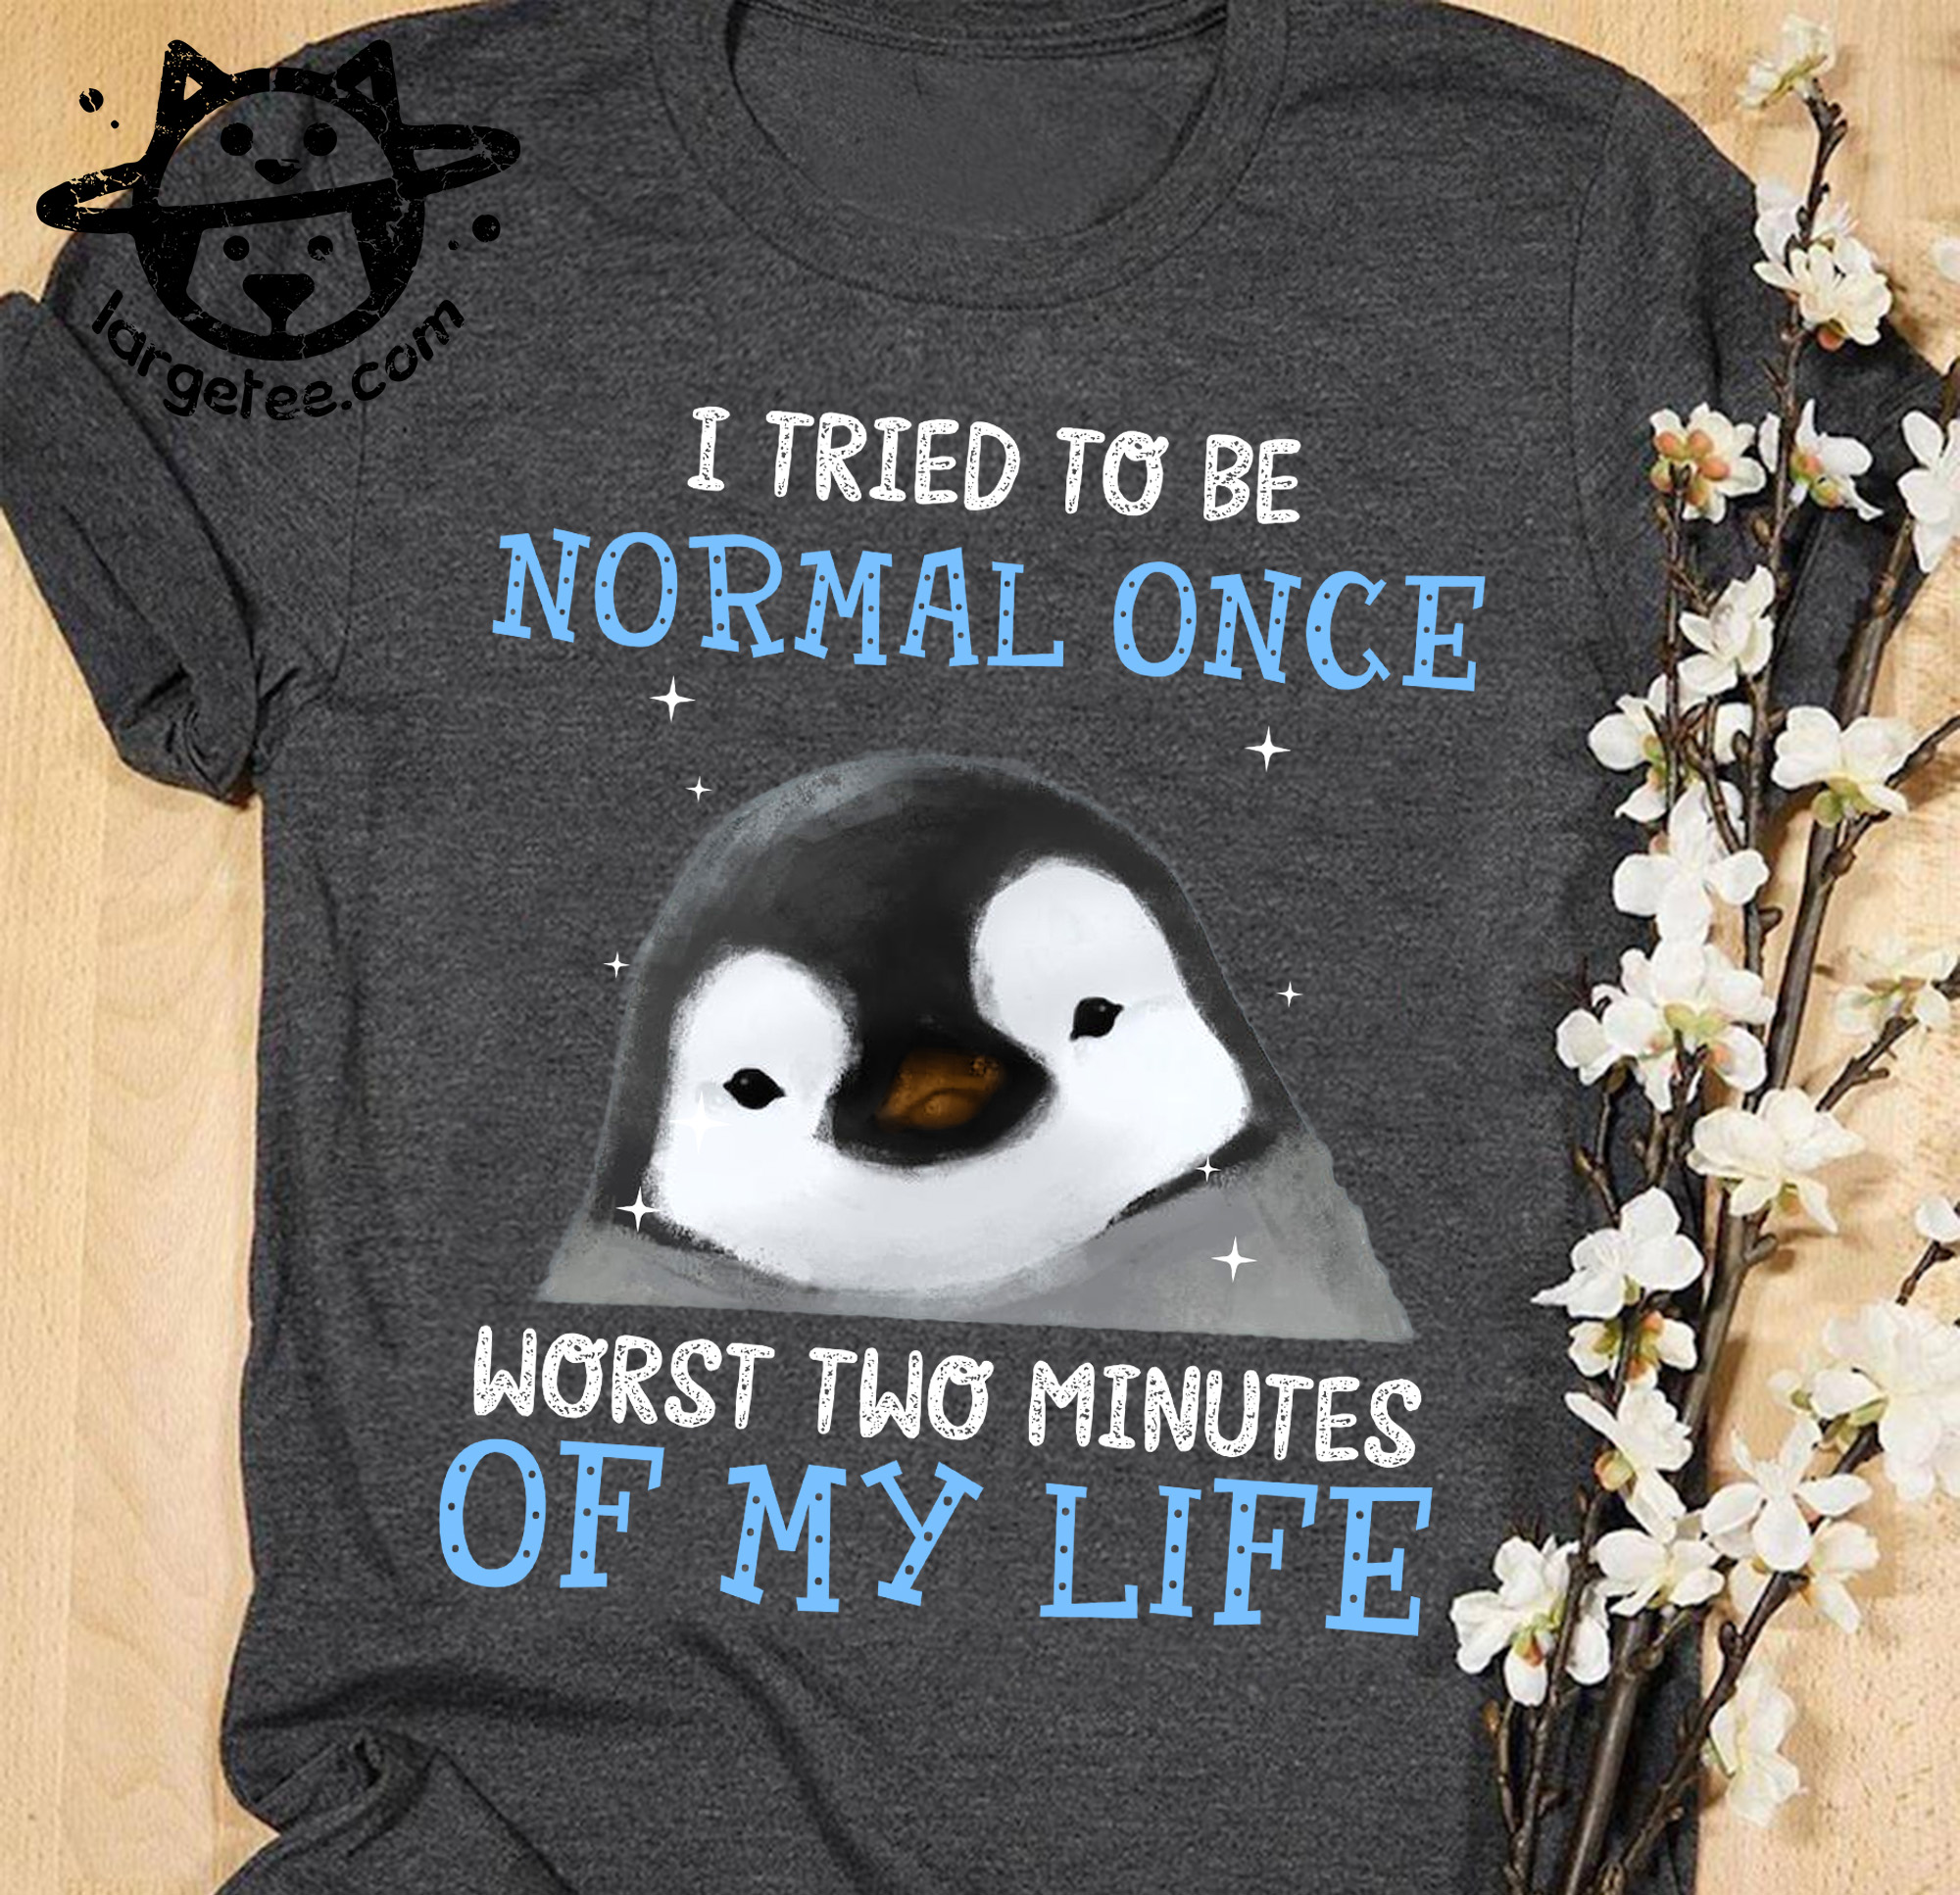 I tried to be normal once worst two minutes of my life - Penguin